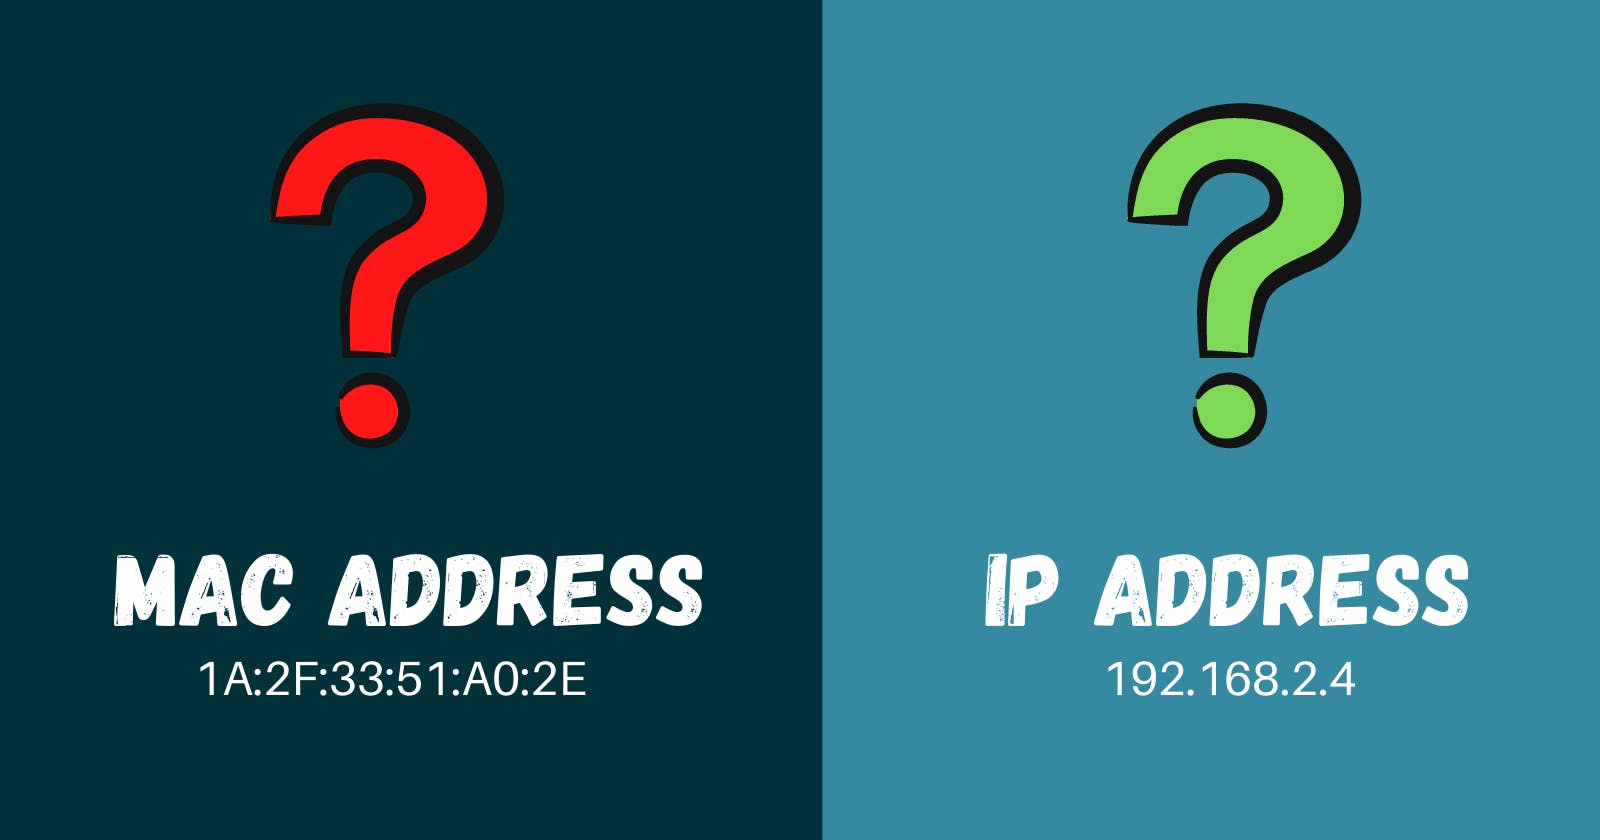 What is an IP address and a MAC address?